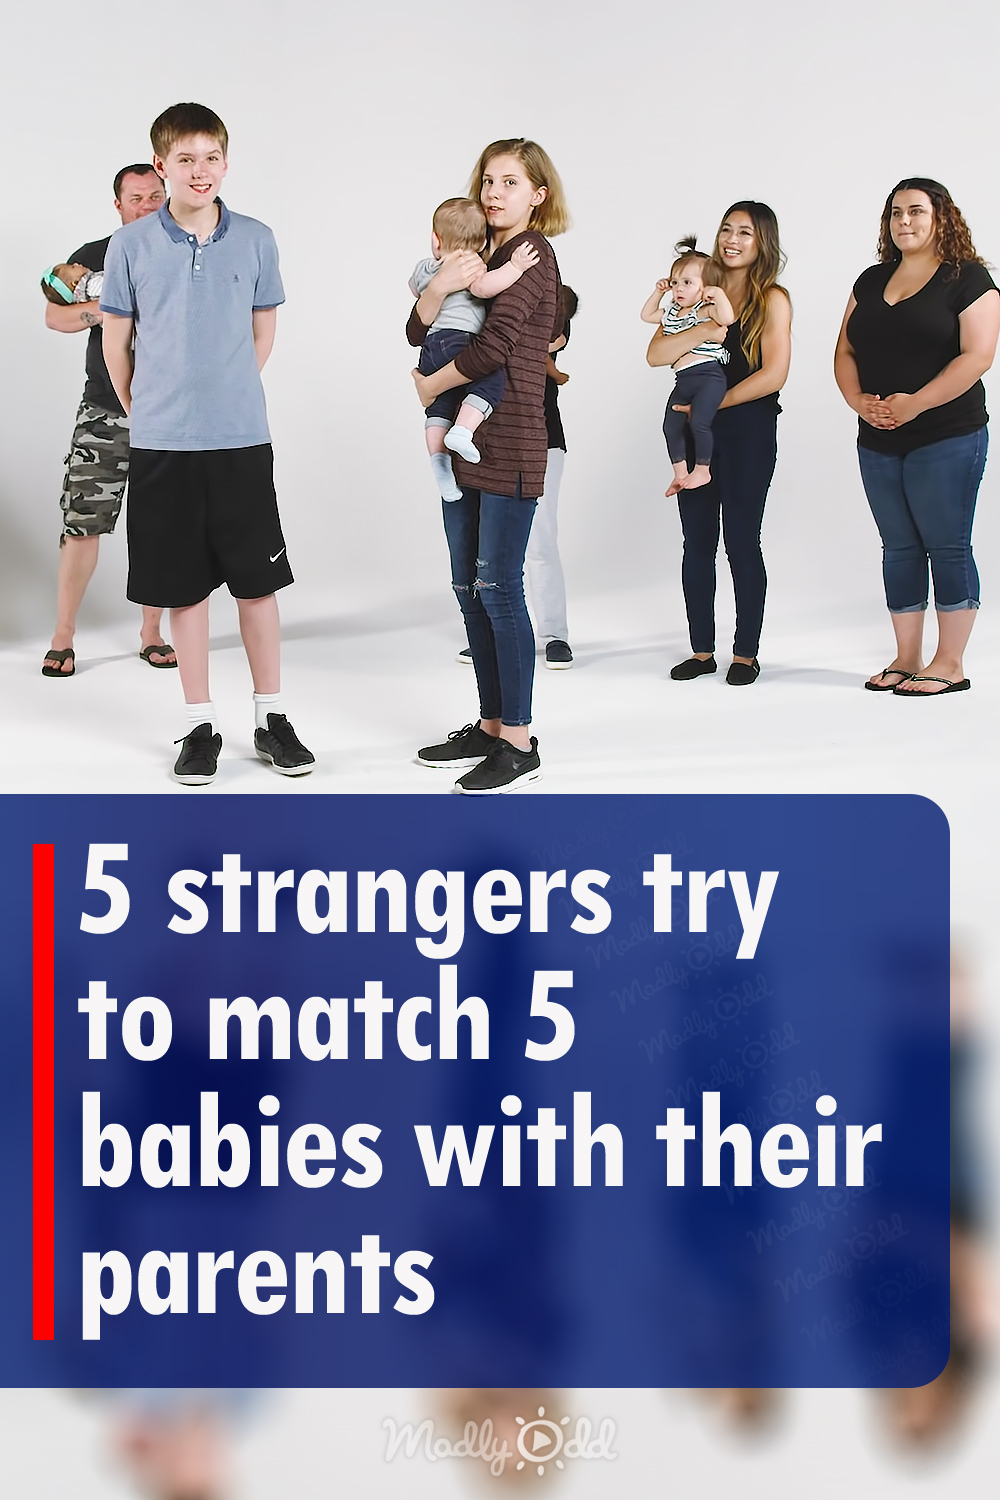 5 strangers try to match 5 babies with their parents